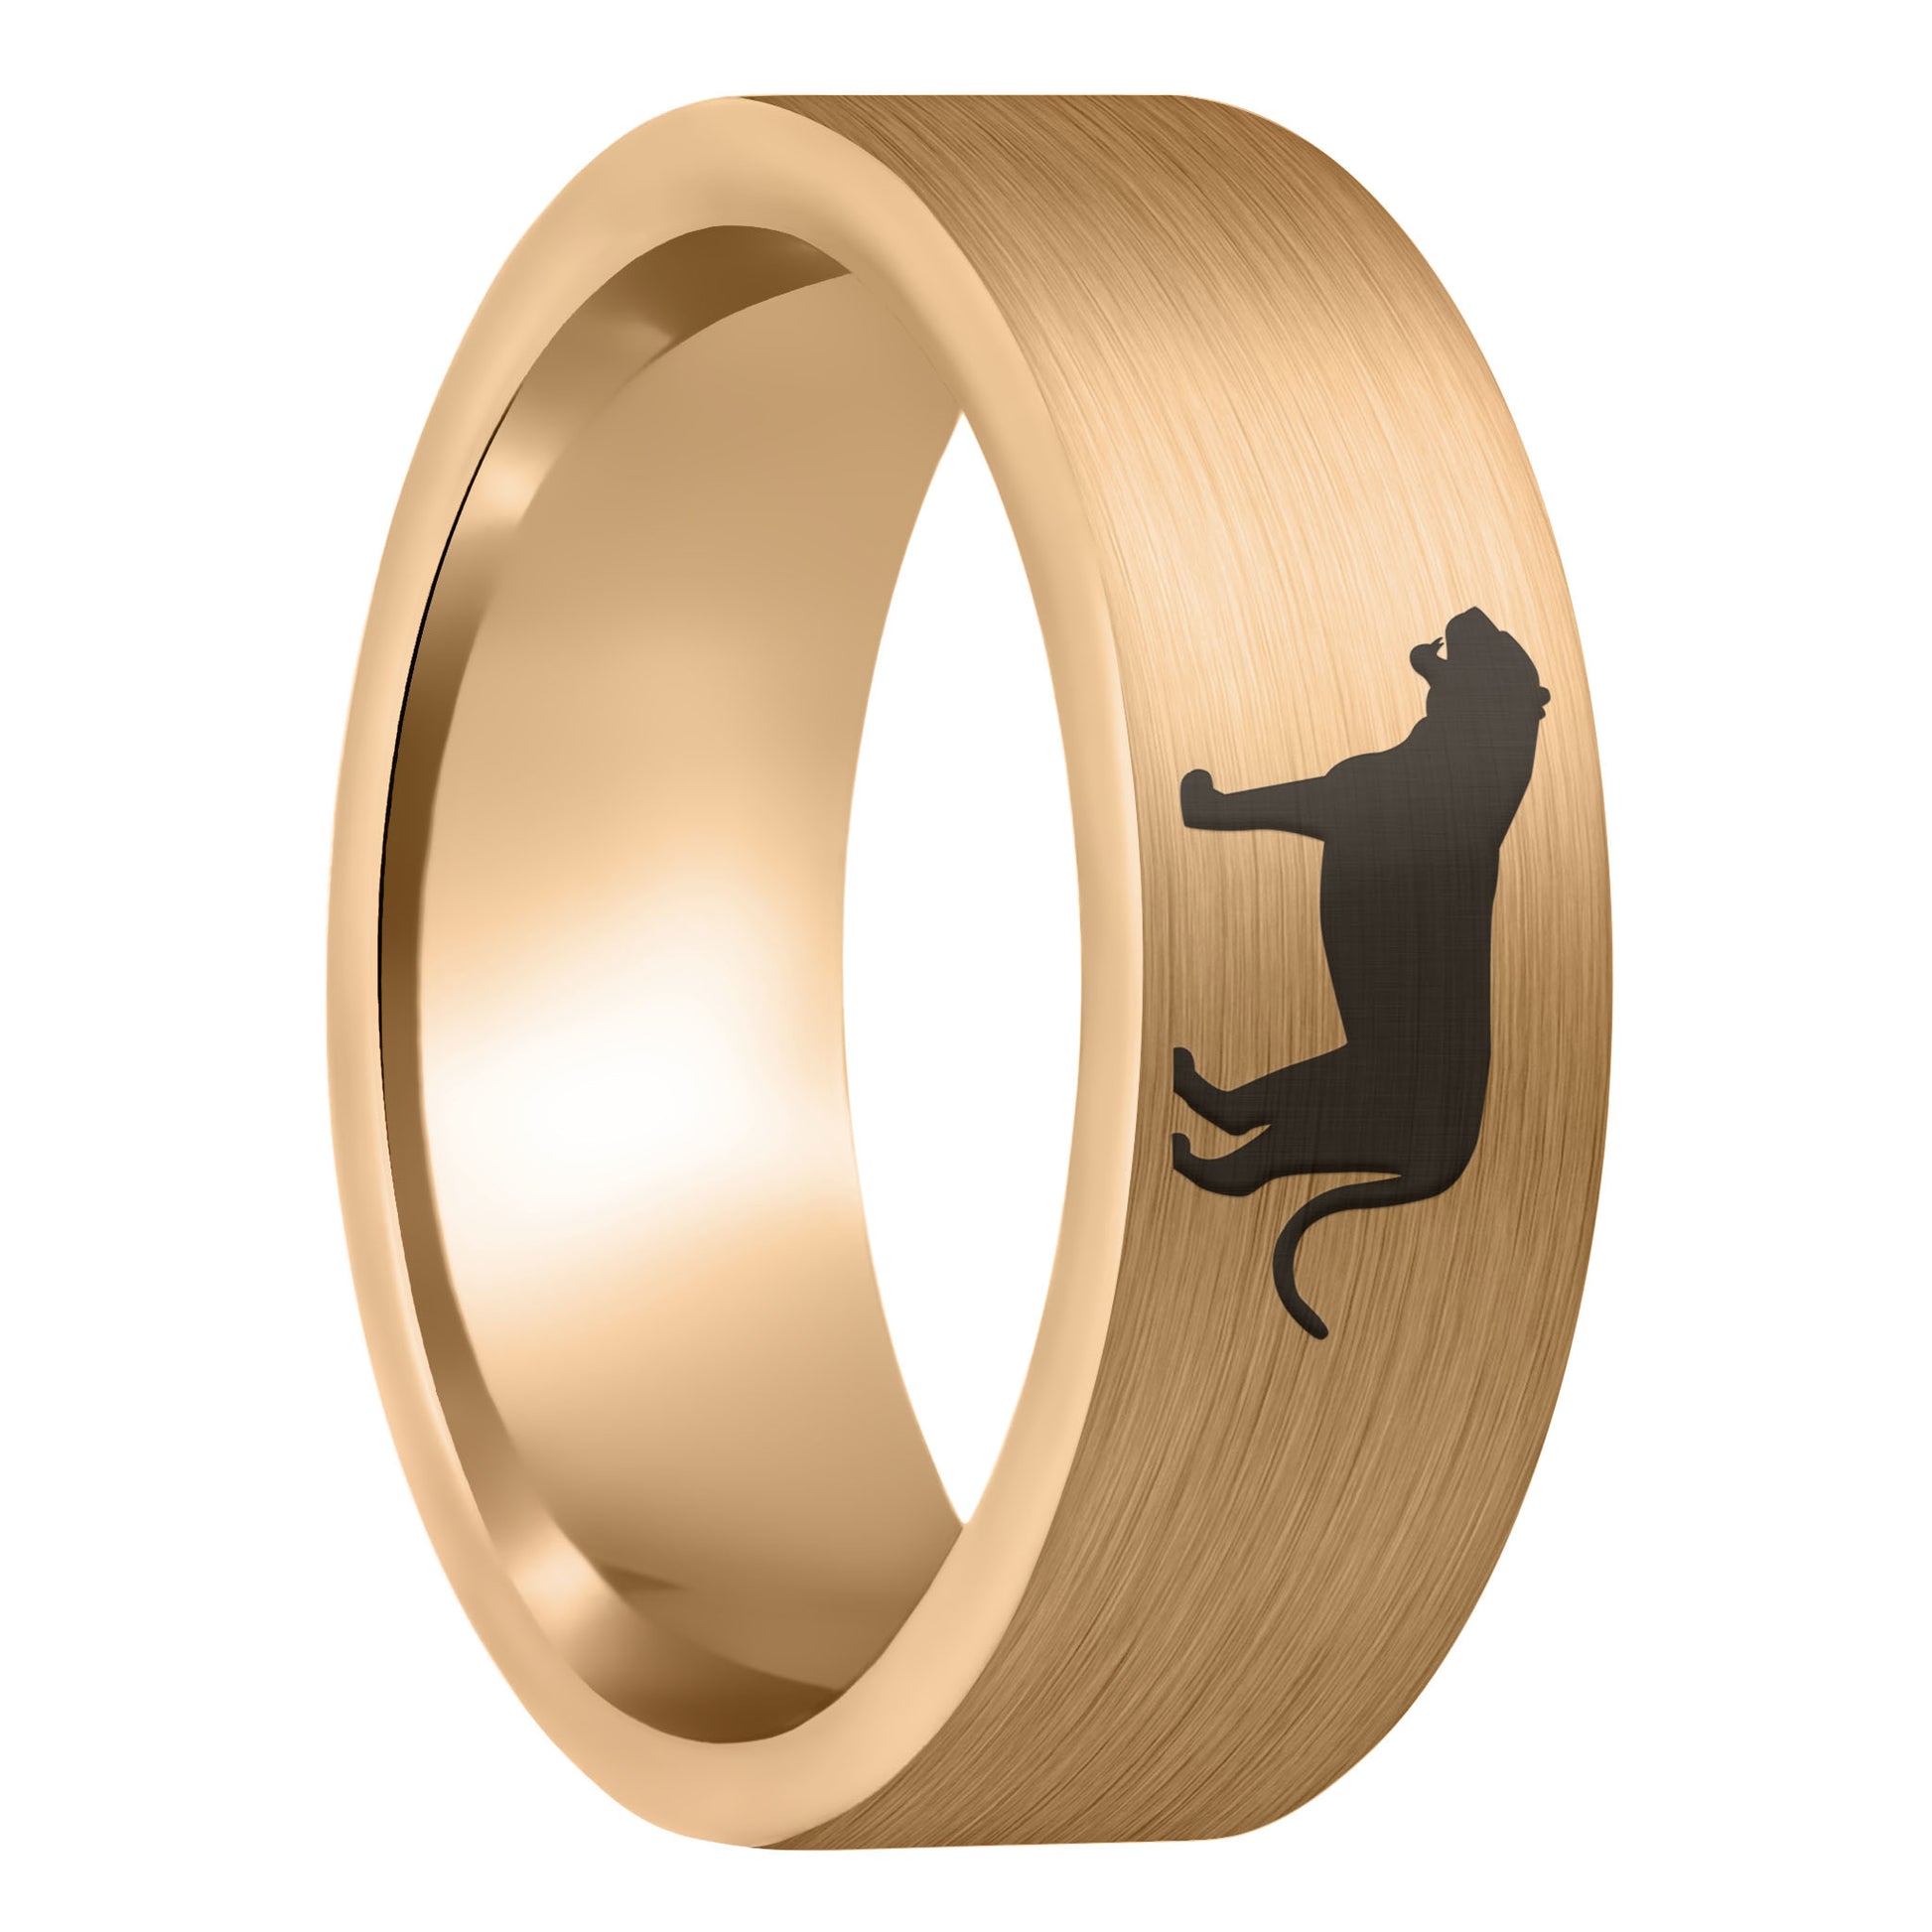 A tiger brushed rose gold tungsten men's wedding band displayed on a plain white background.